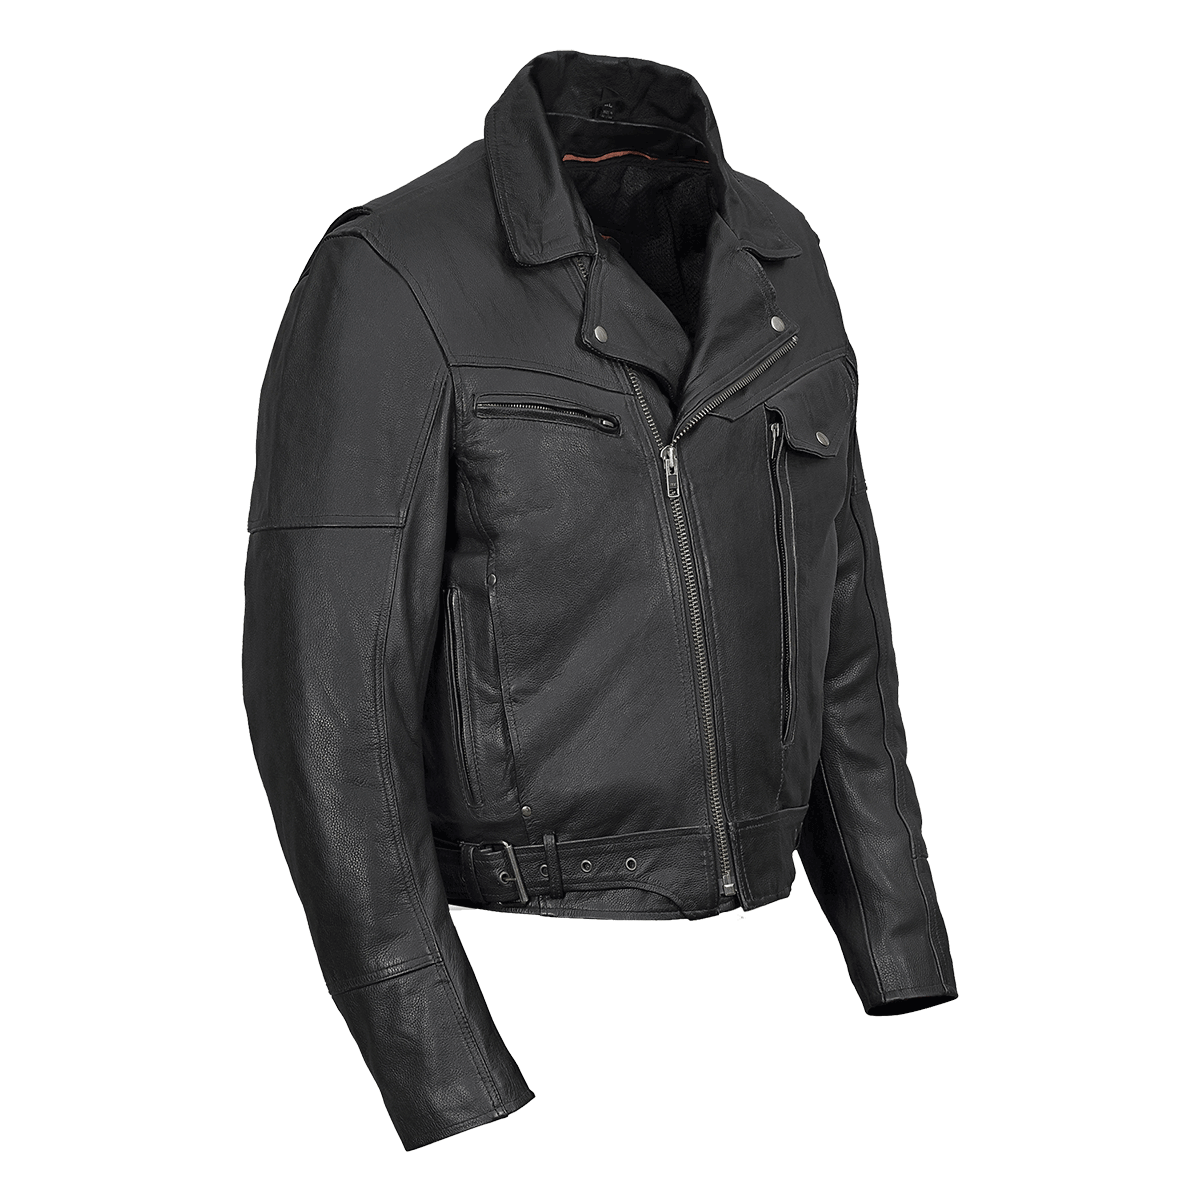 Vance Leather VL509 Men's Pistol Pete Premium Leather Jacket with Lower Padded Back